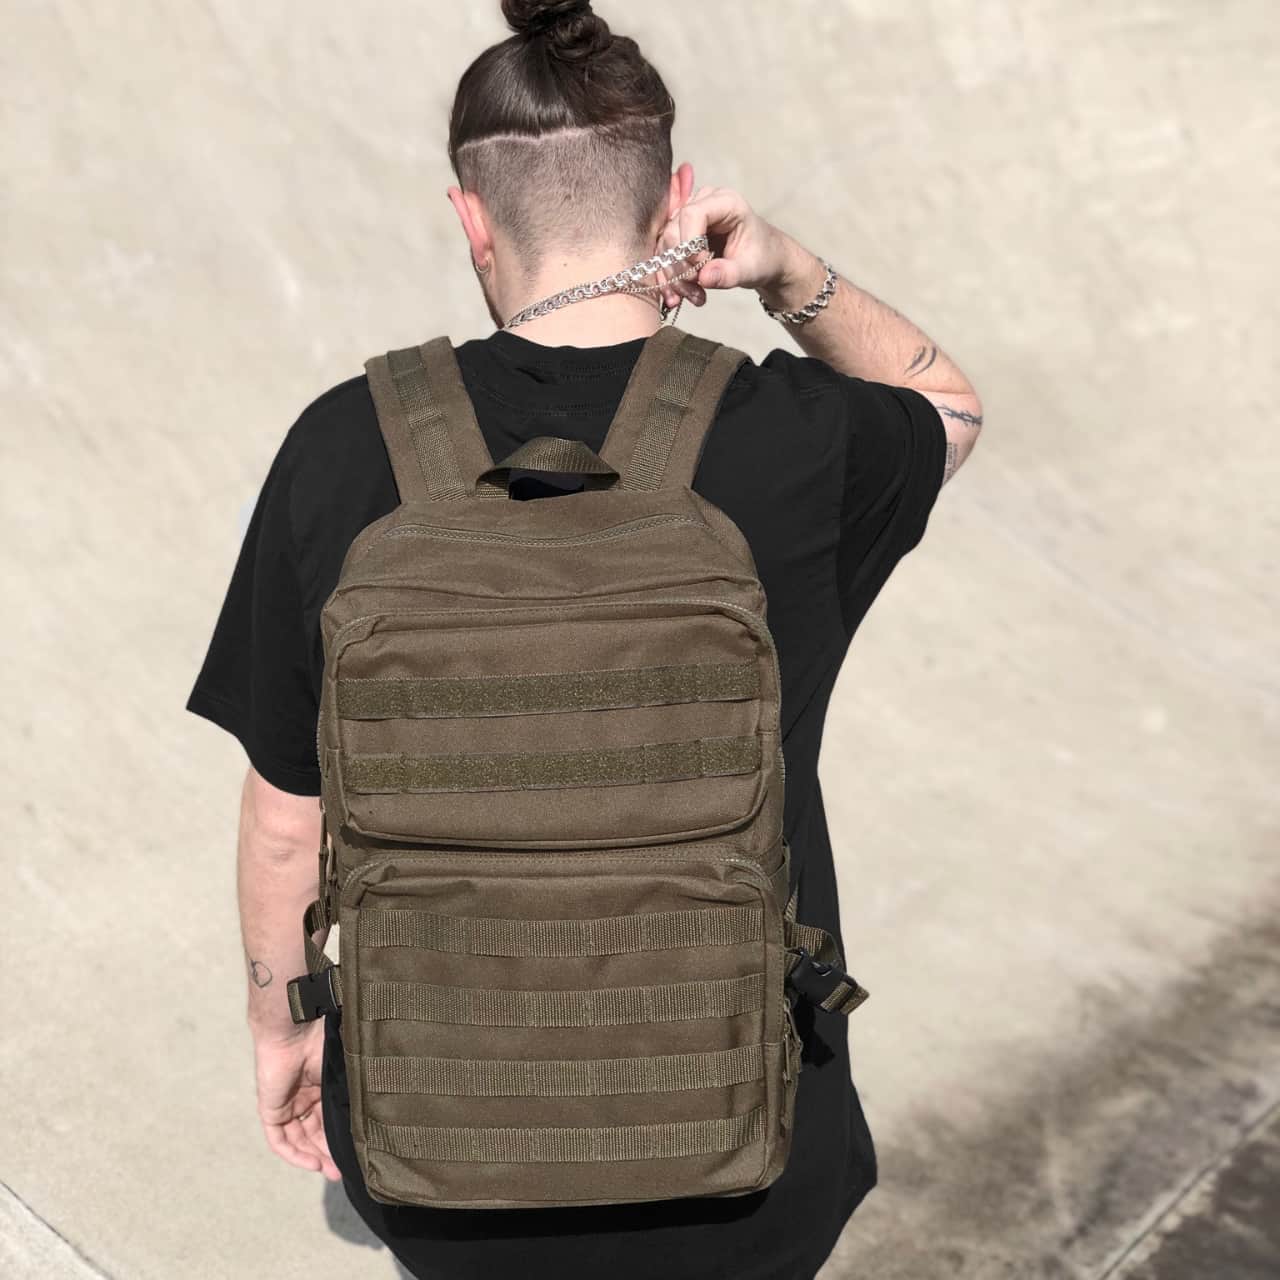 Model wearing the Tactical Bag with MOLLE and the hook-and-loop system